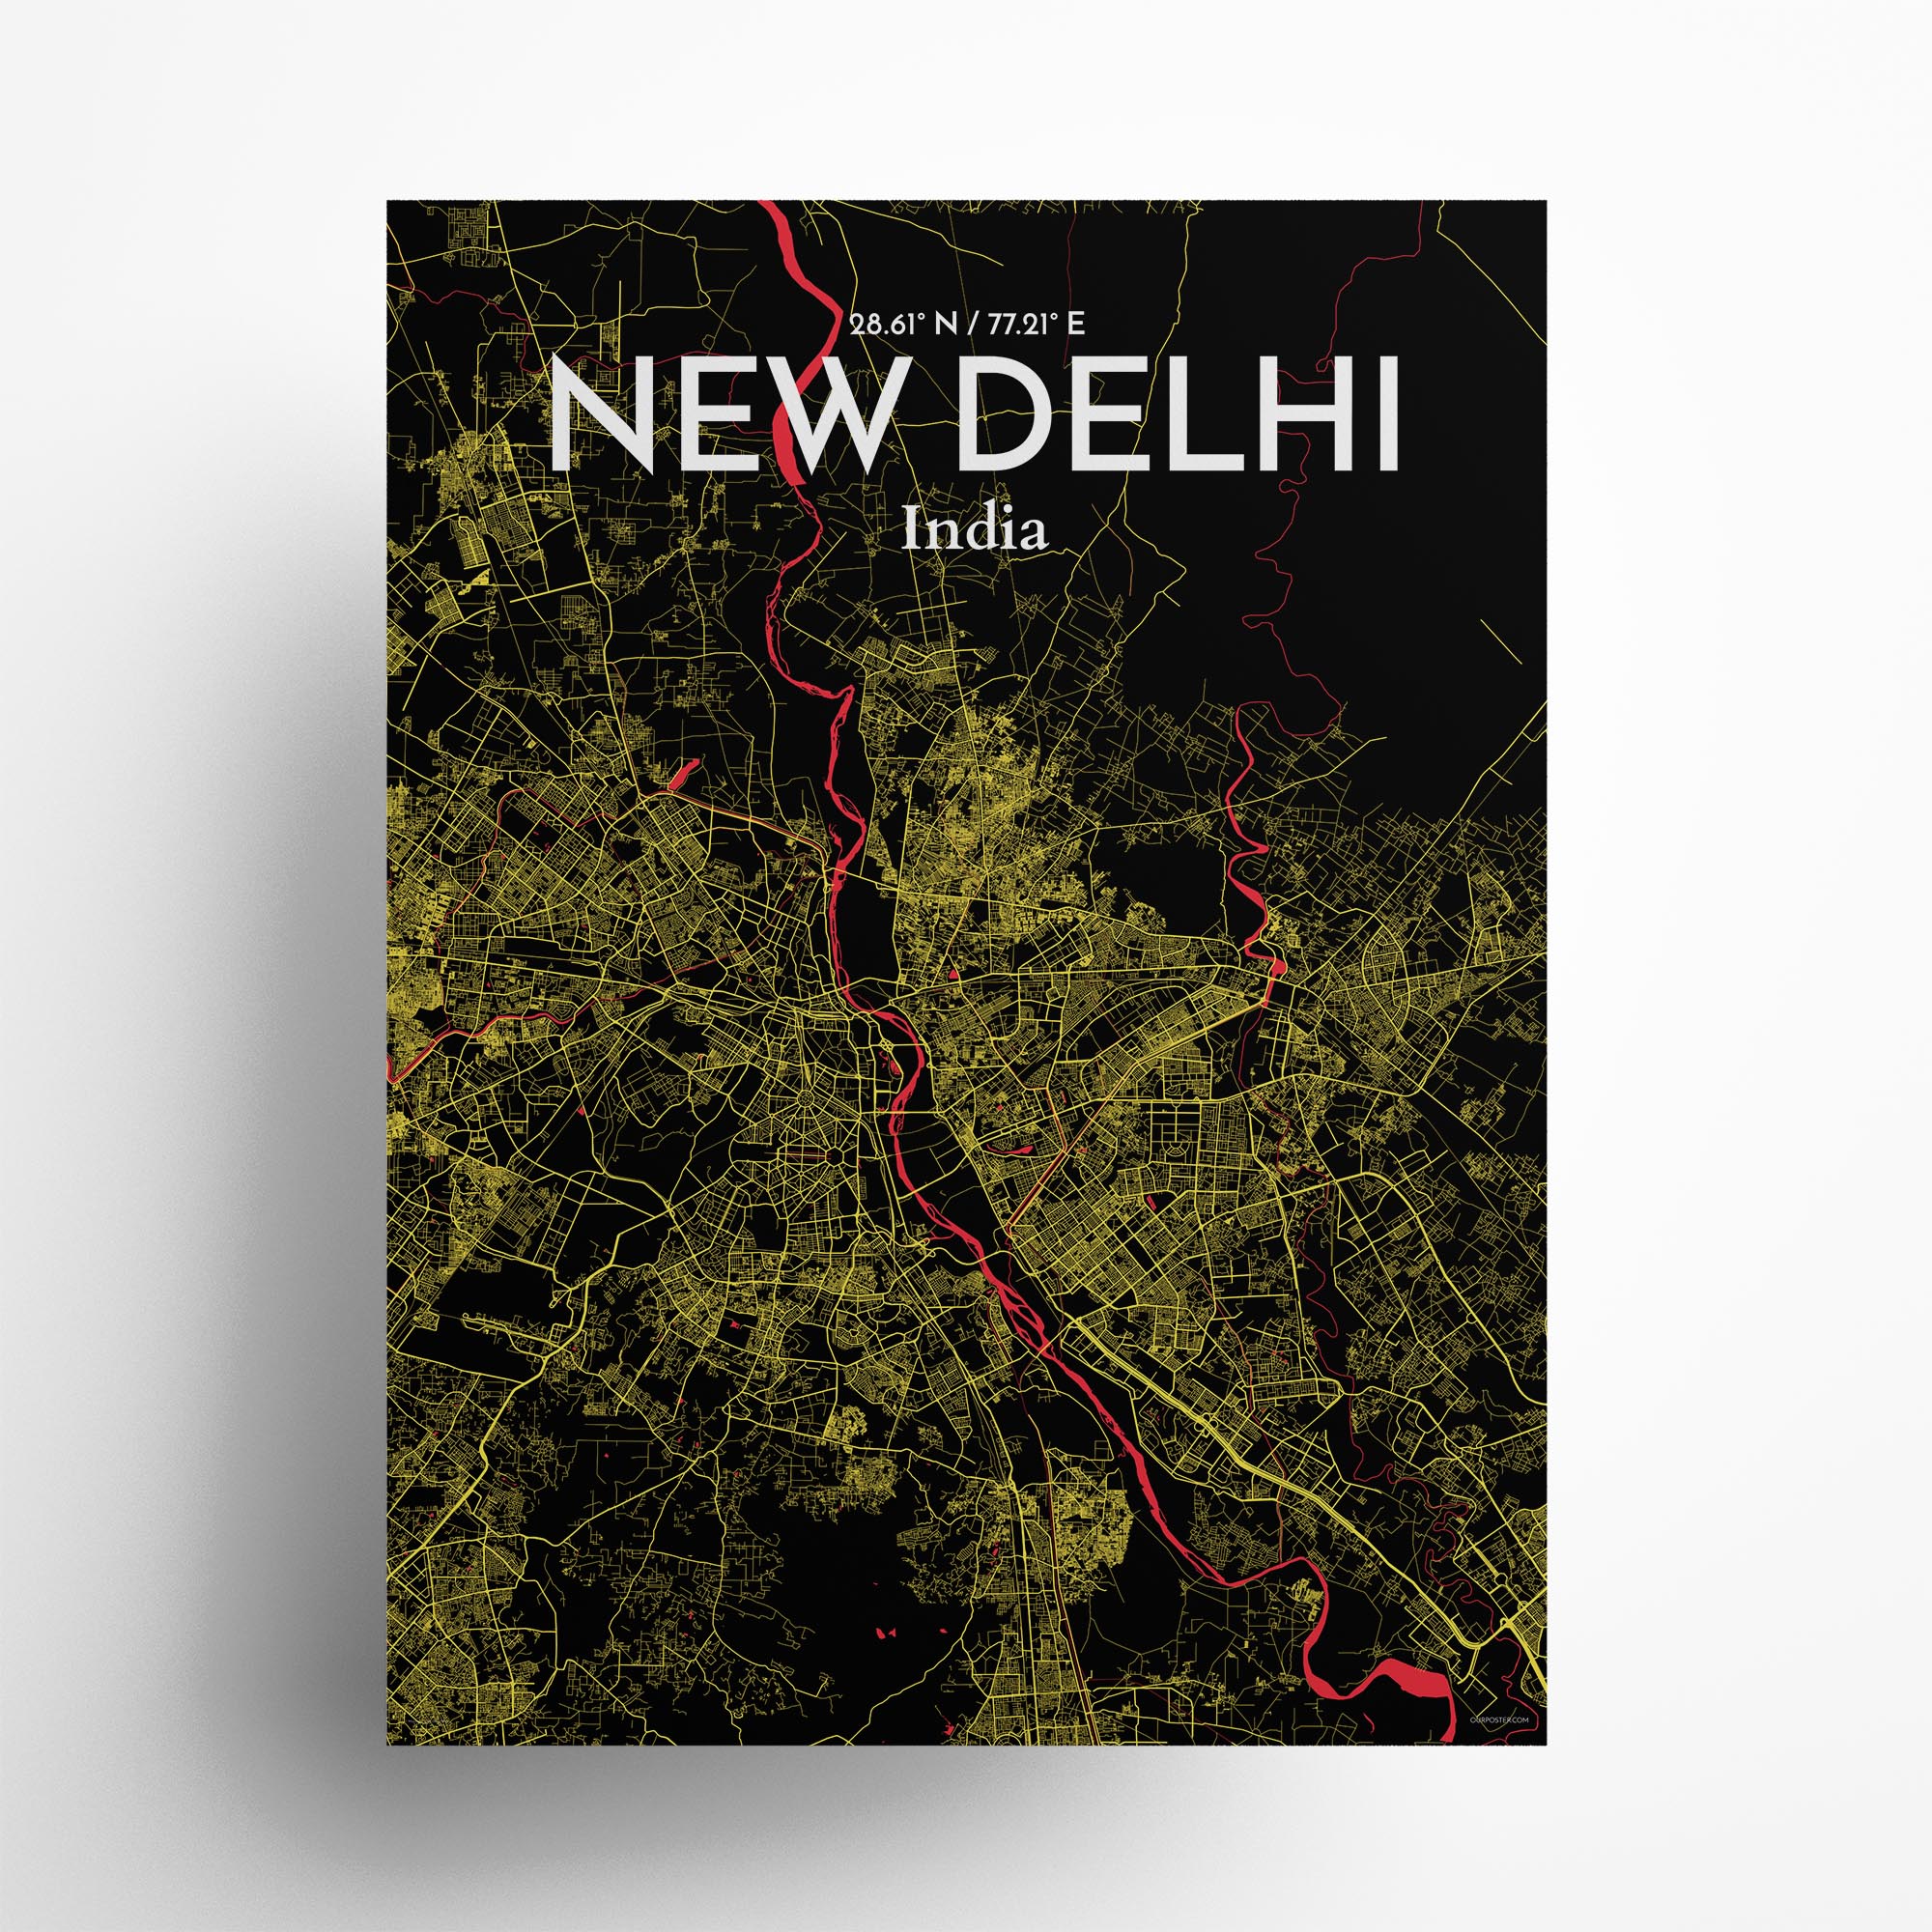 New Delhi city map poster in Contrast of size 18" x 24"